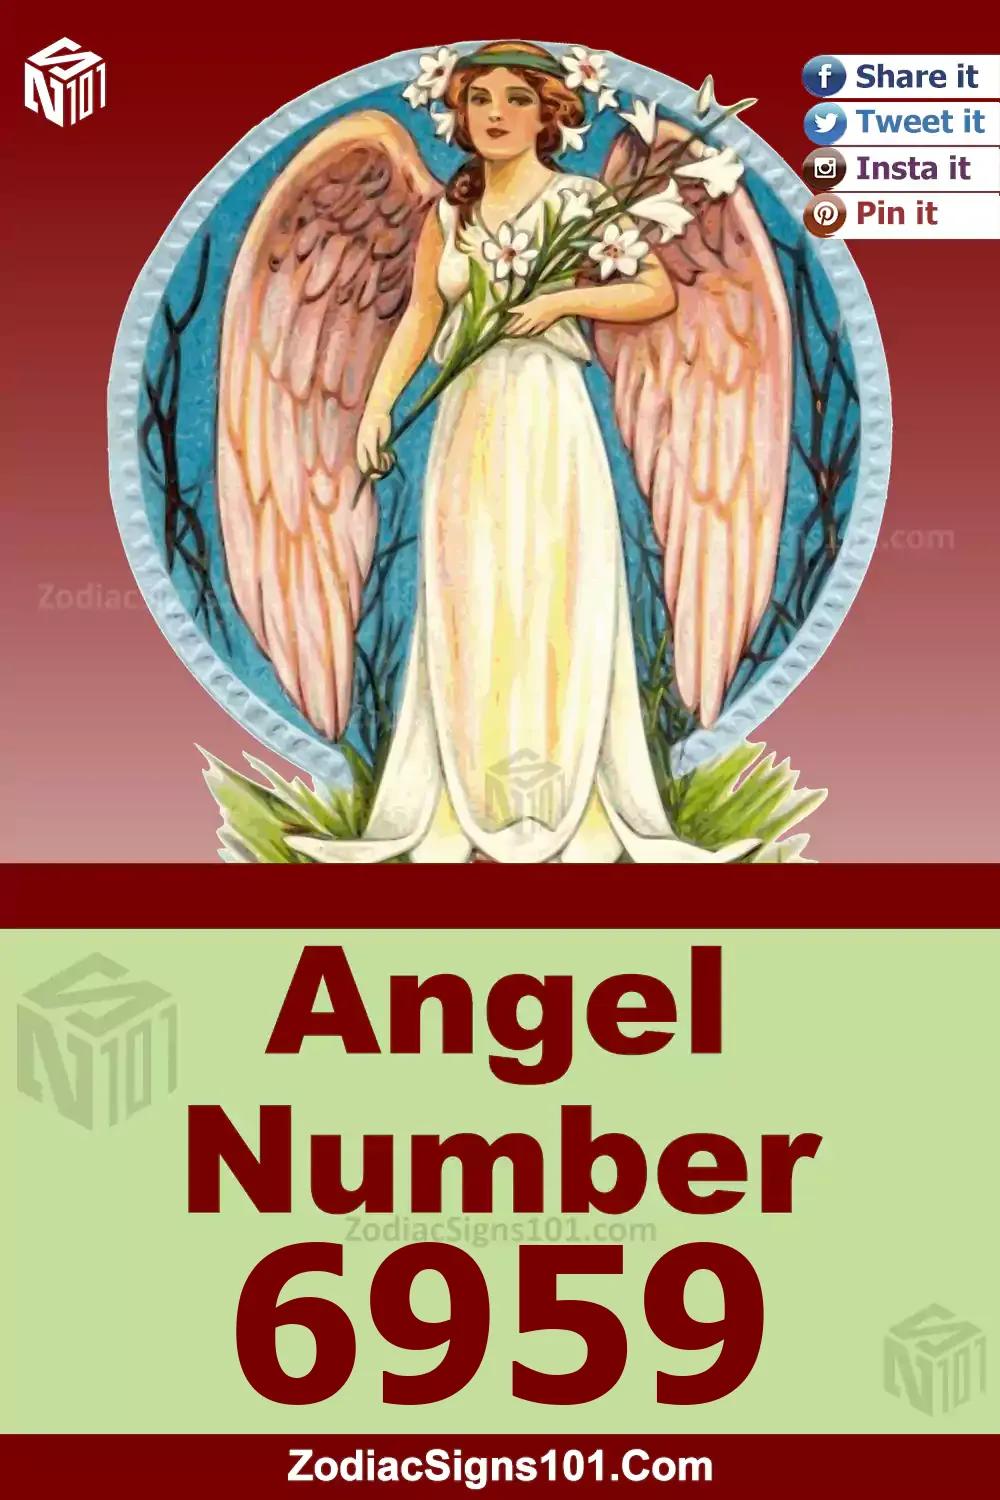 6959 Angel Number Meaning